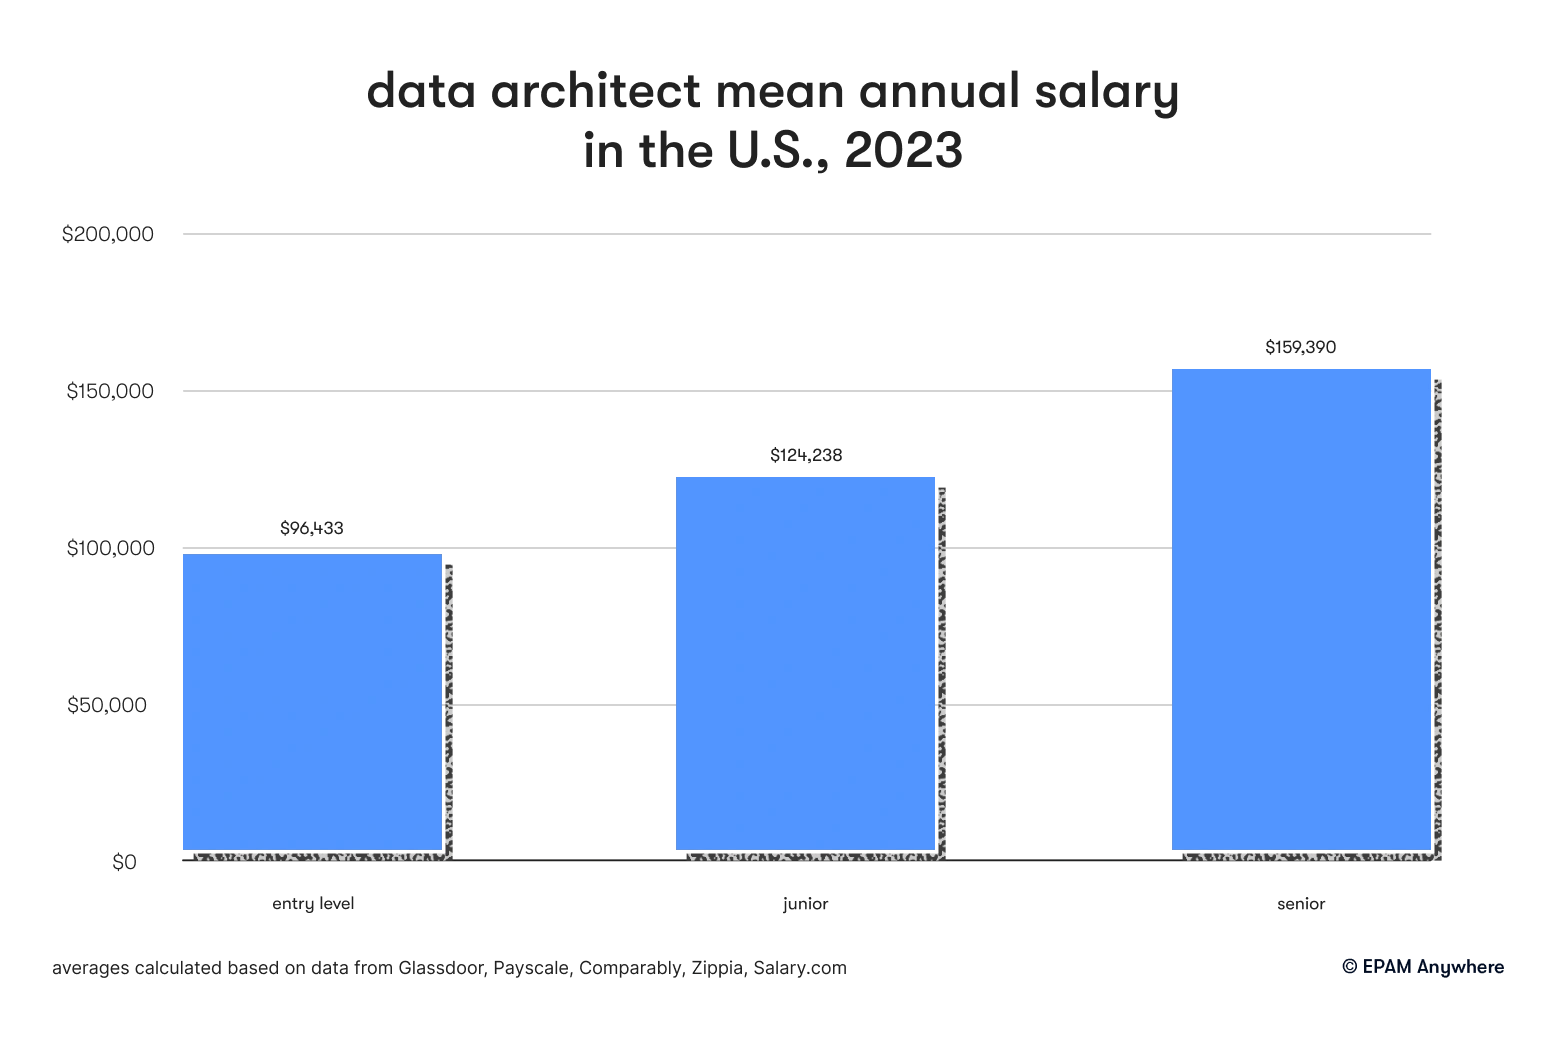 data architect mean annual salary in the U.S., 2023